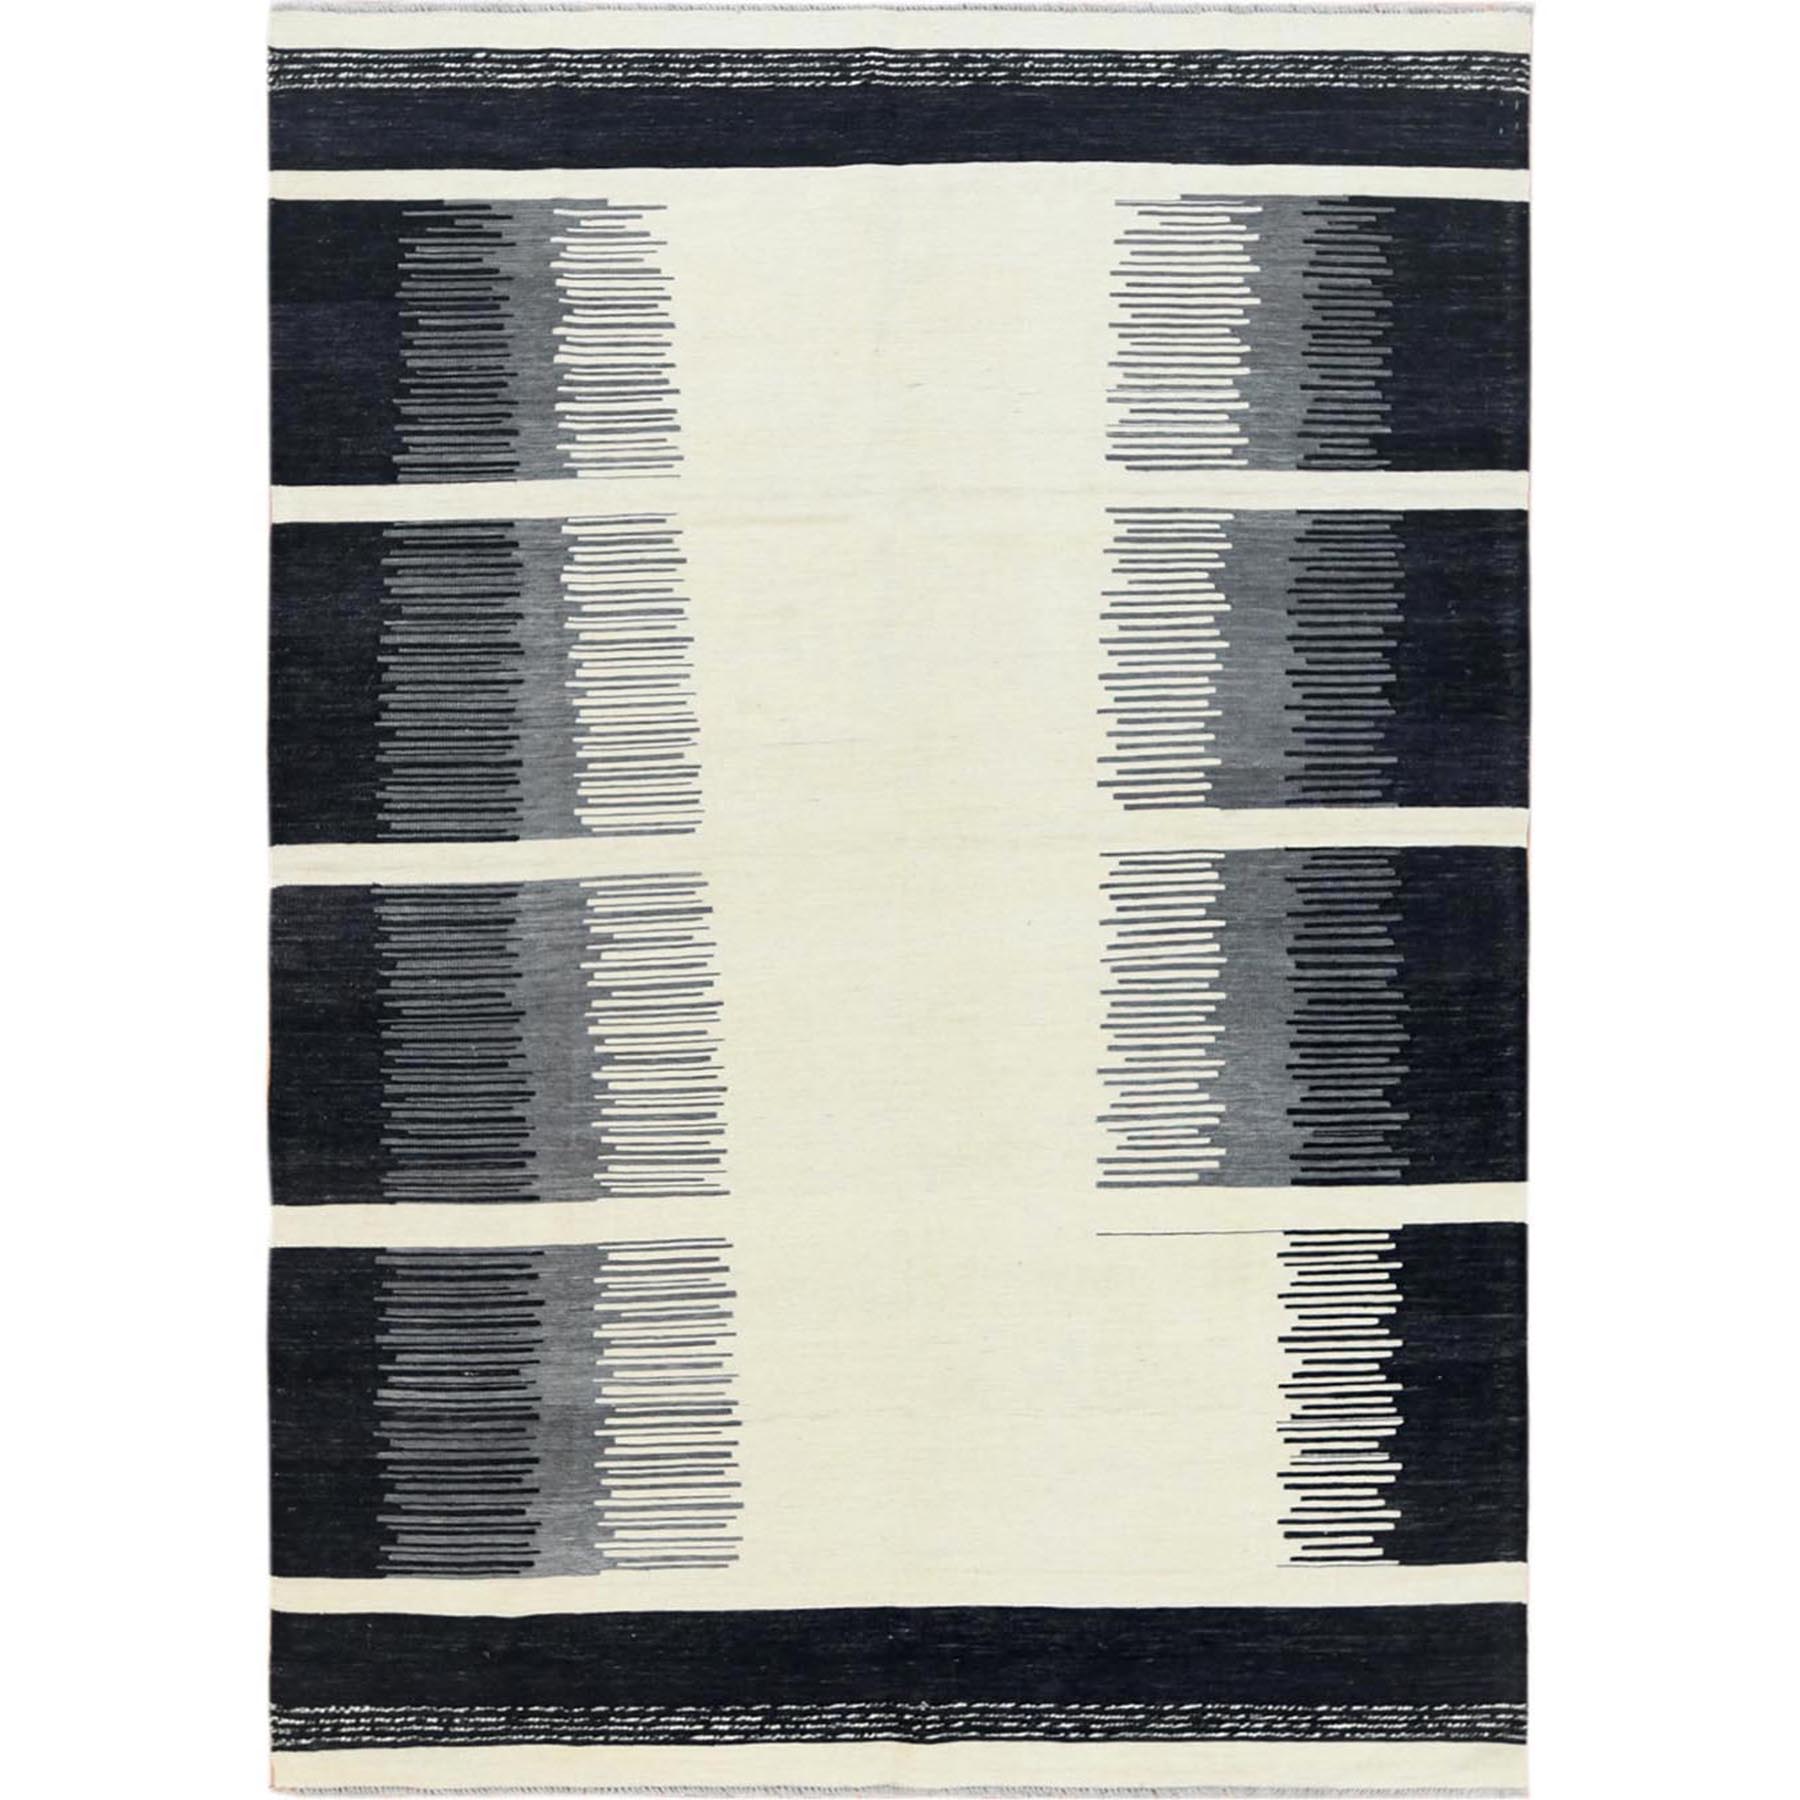 Modern & Contemporary Wool Hand-Woven Area Rug 6'3